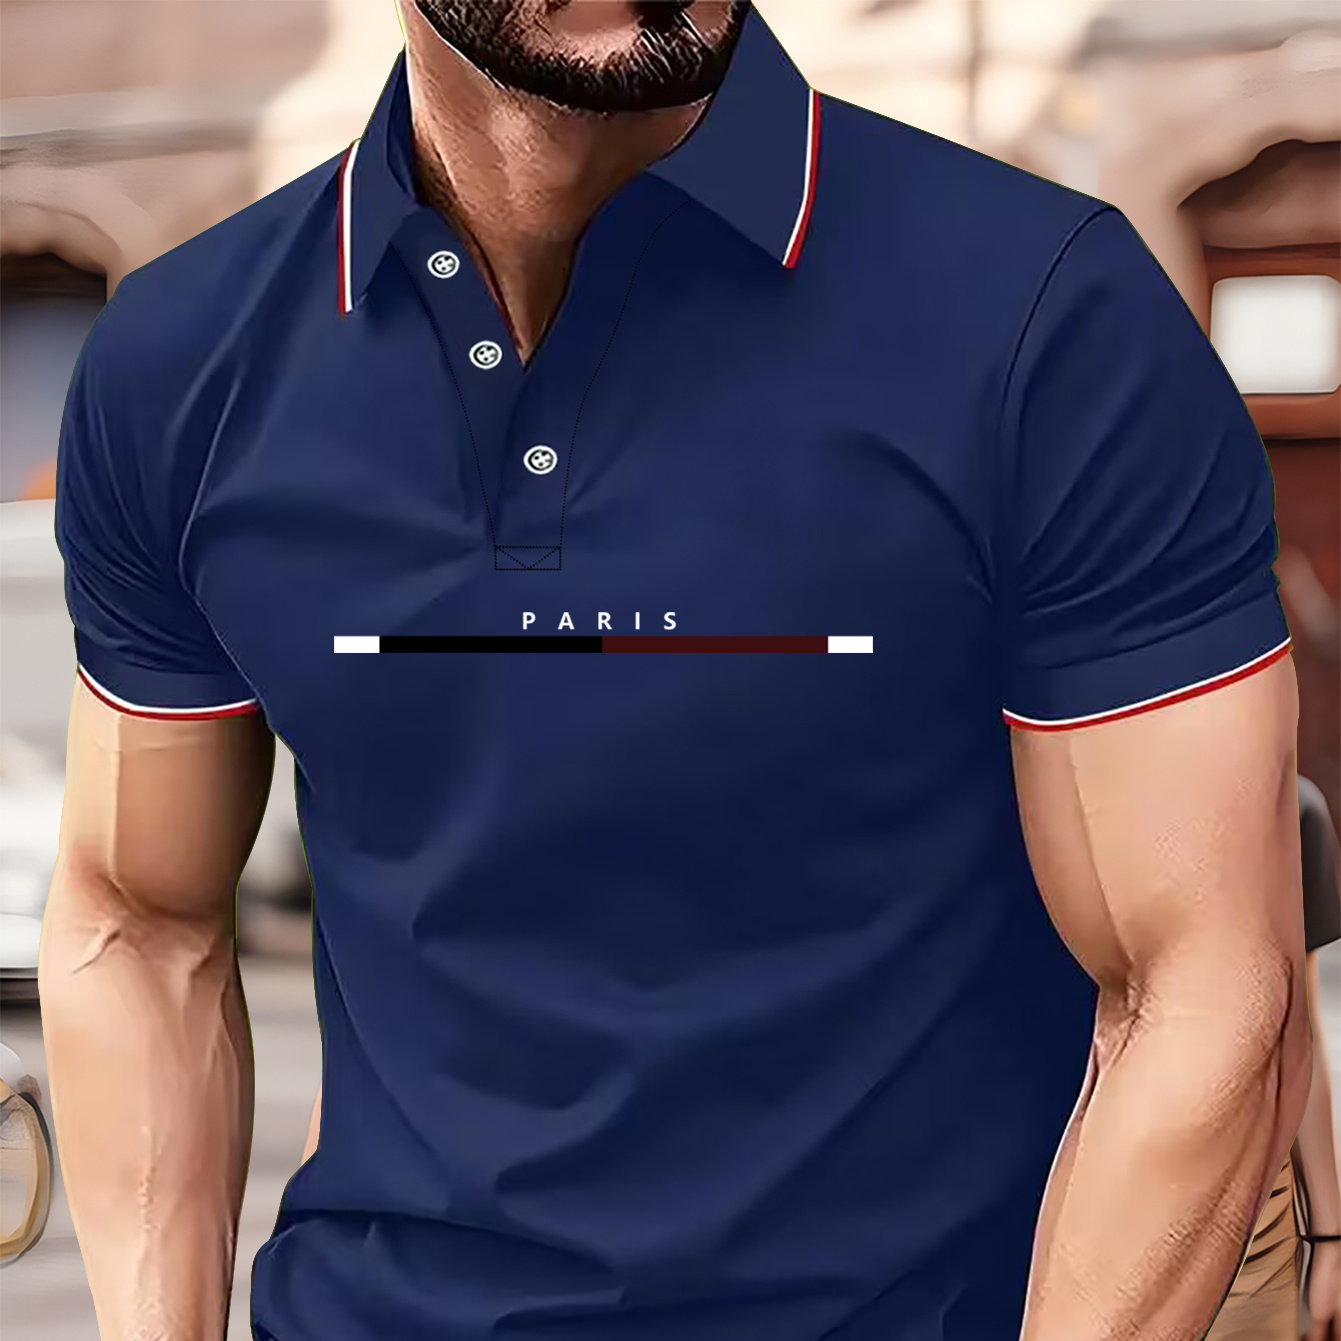 

Paris Letter Print Men's Short Sleeve Lapel Golf T-shirt, Summer Trendy Tennis Tees, Casual Comfortable Breathable Top For Outdoor Sports